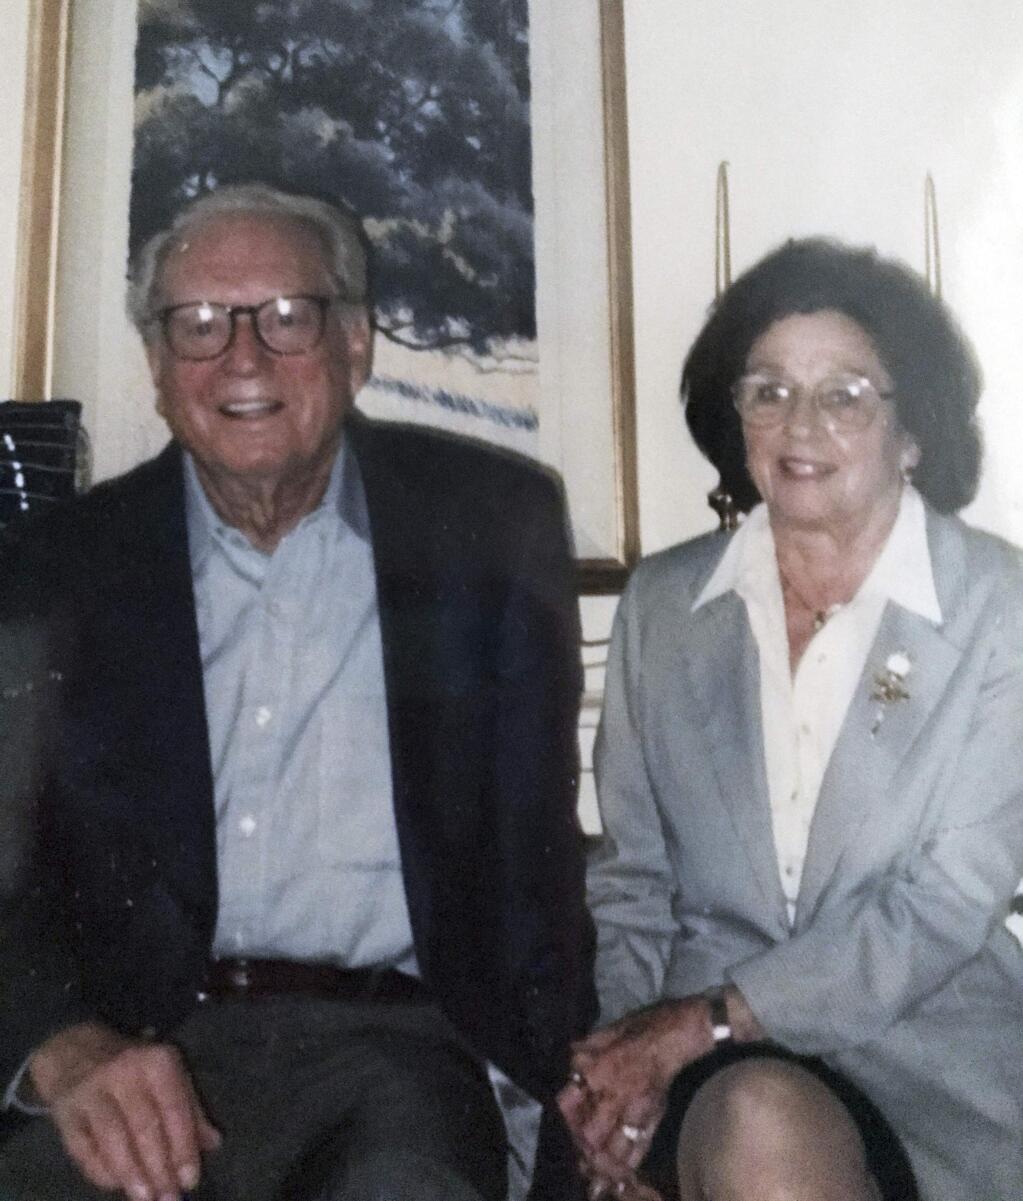 This undated photo shows Charles and Sara Rippey. Charles, 100, and Sara, 98, were unable to escape their Napa, Calif., home, and died when the Atlas fire swept through. Their bodies were found Monday, Oct. 9, 2017. (Courtesy Michael Rippey via AP)